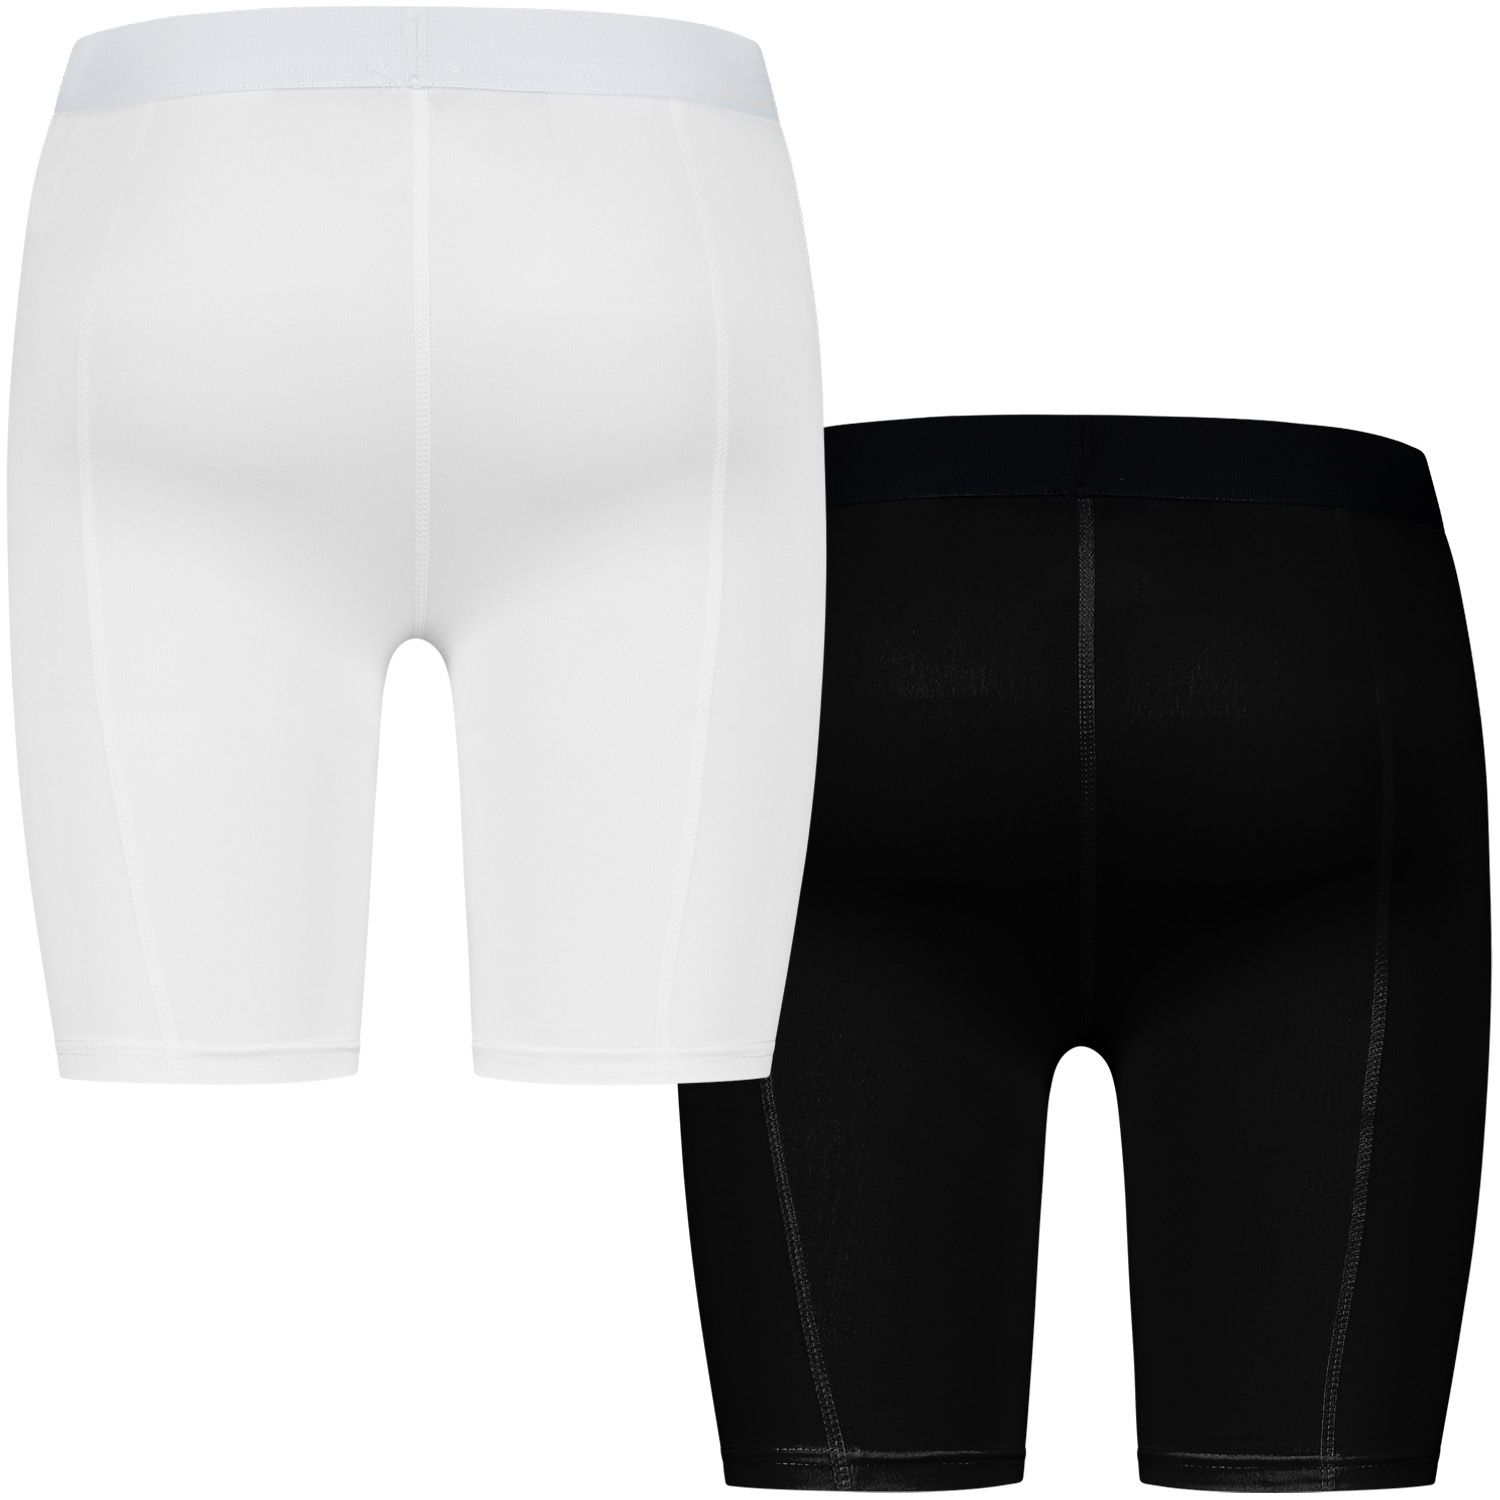 gladiator sports womens compression shorts in black and white back view